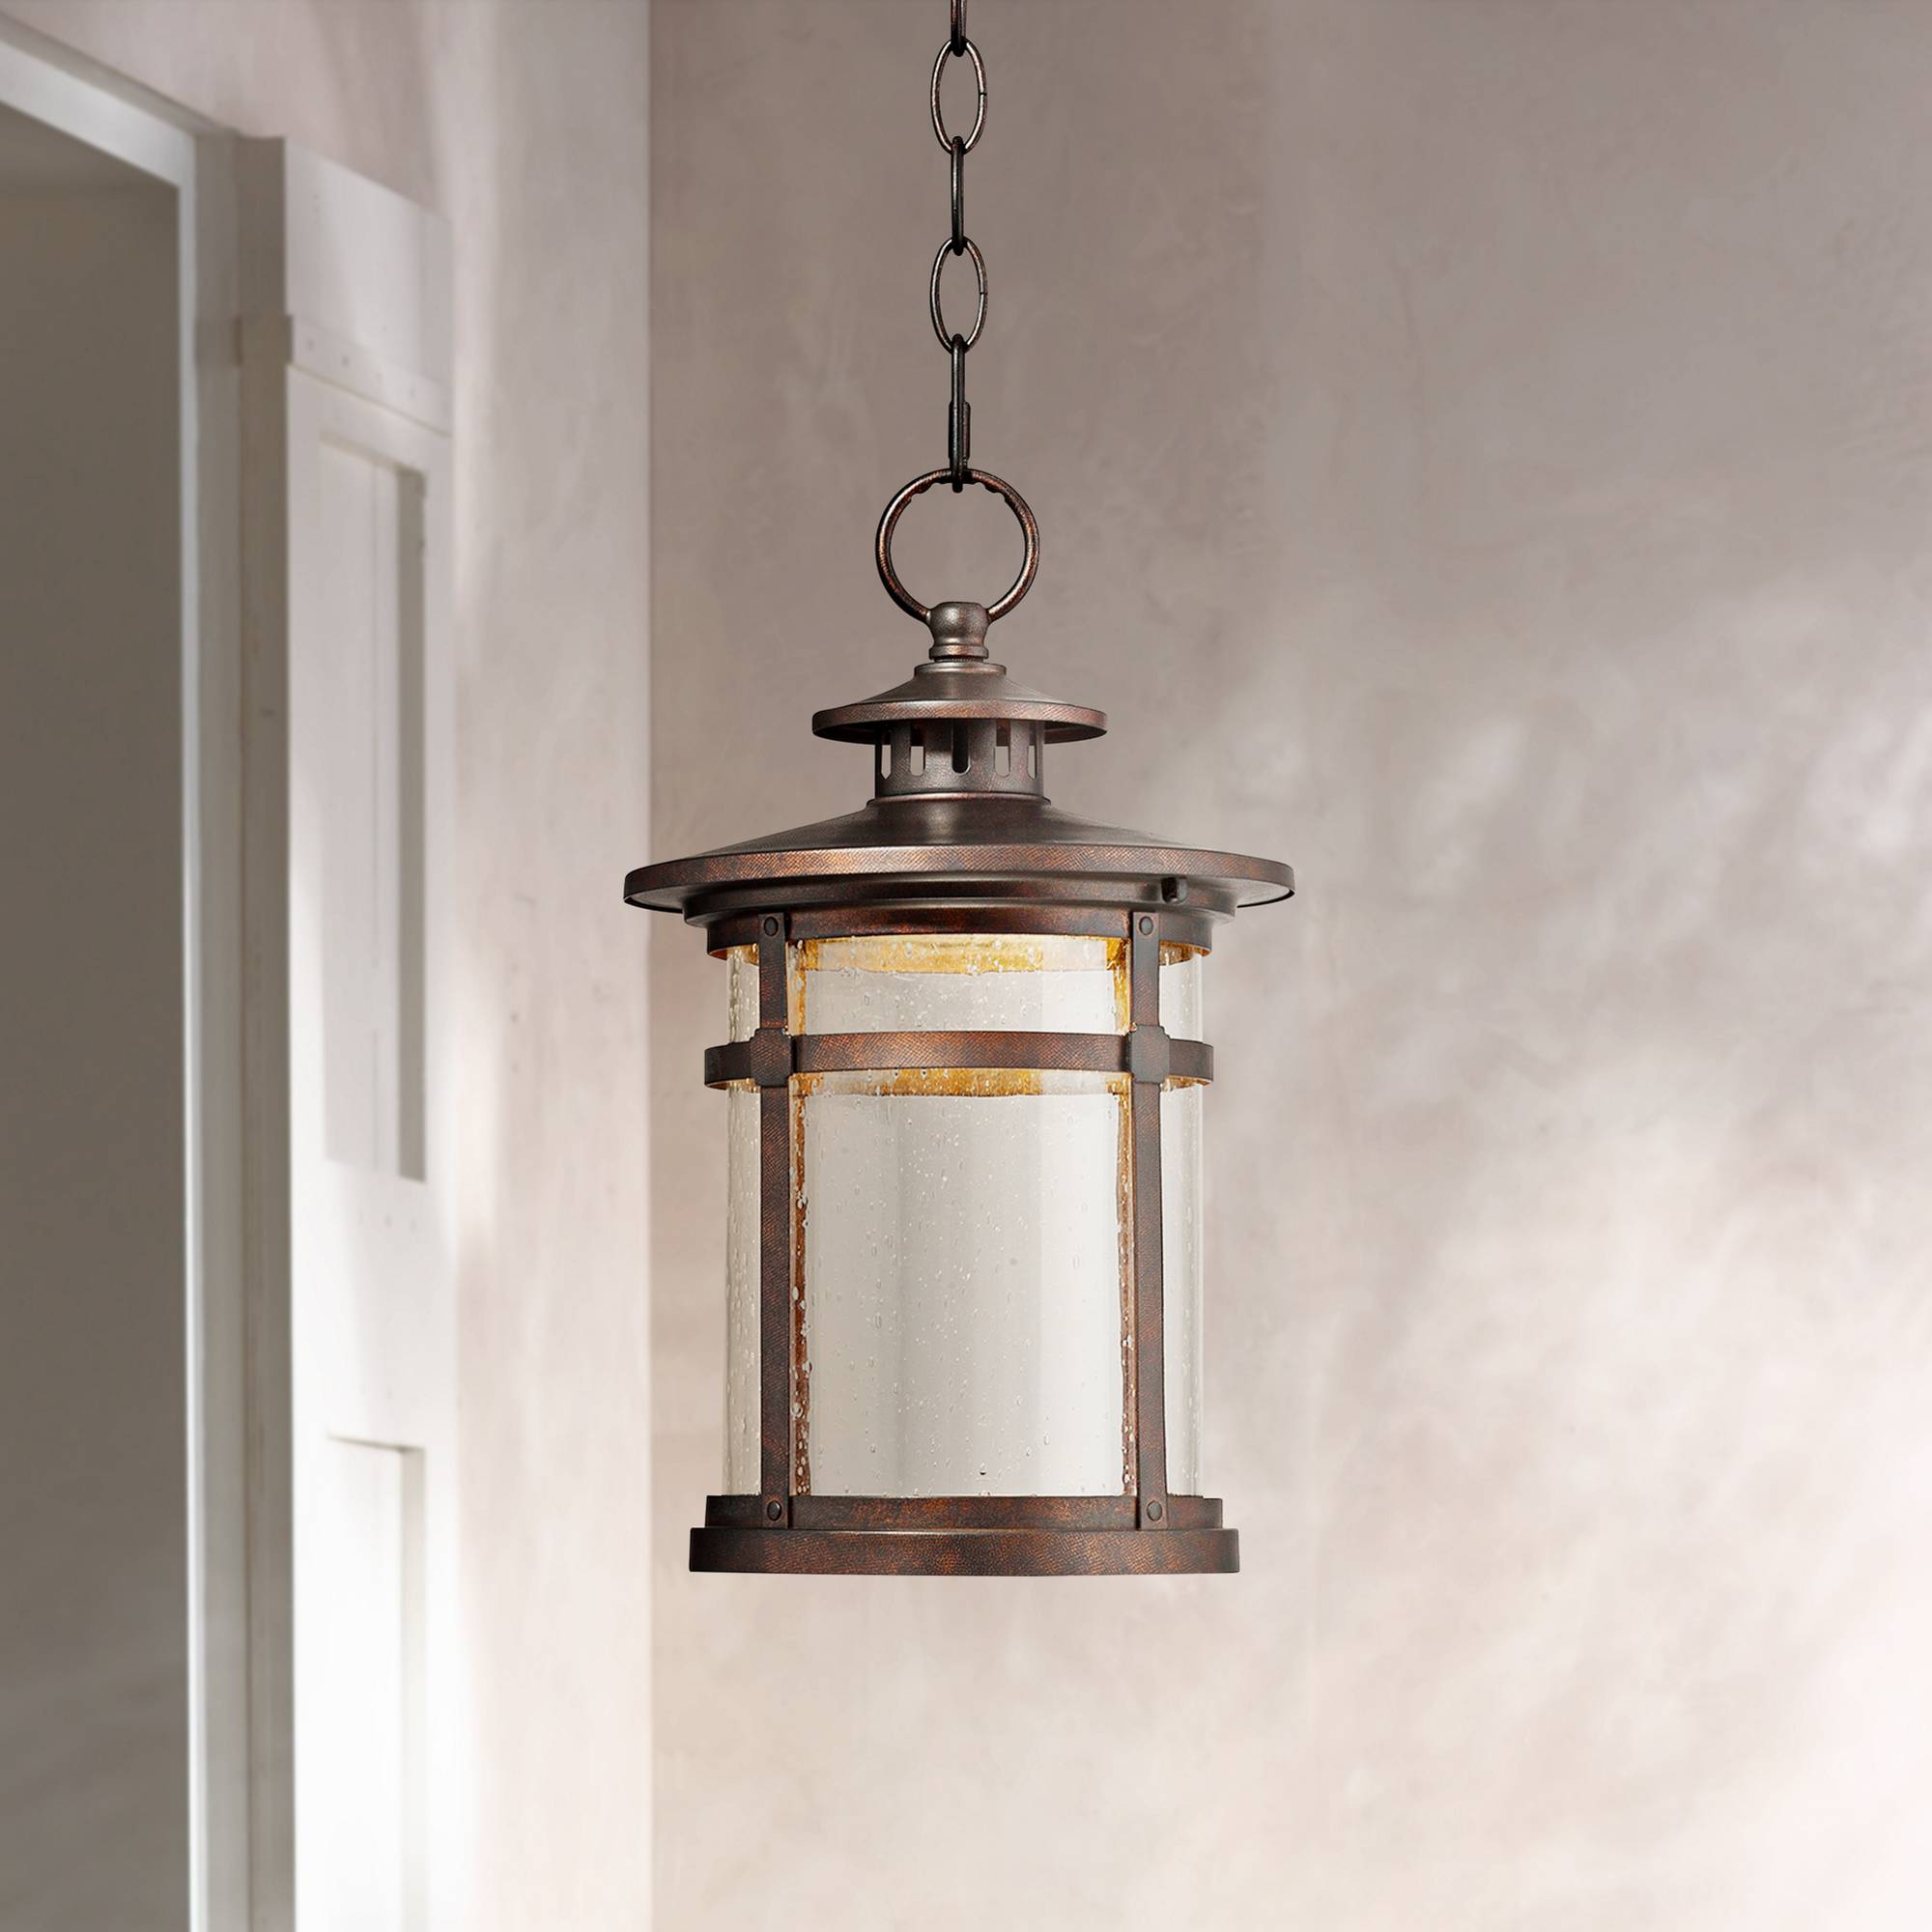 Details About Rustic Outdoor Ceiling Light Hanging Lantern Led Bronze 13 1 2 For House Porch